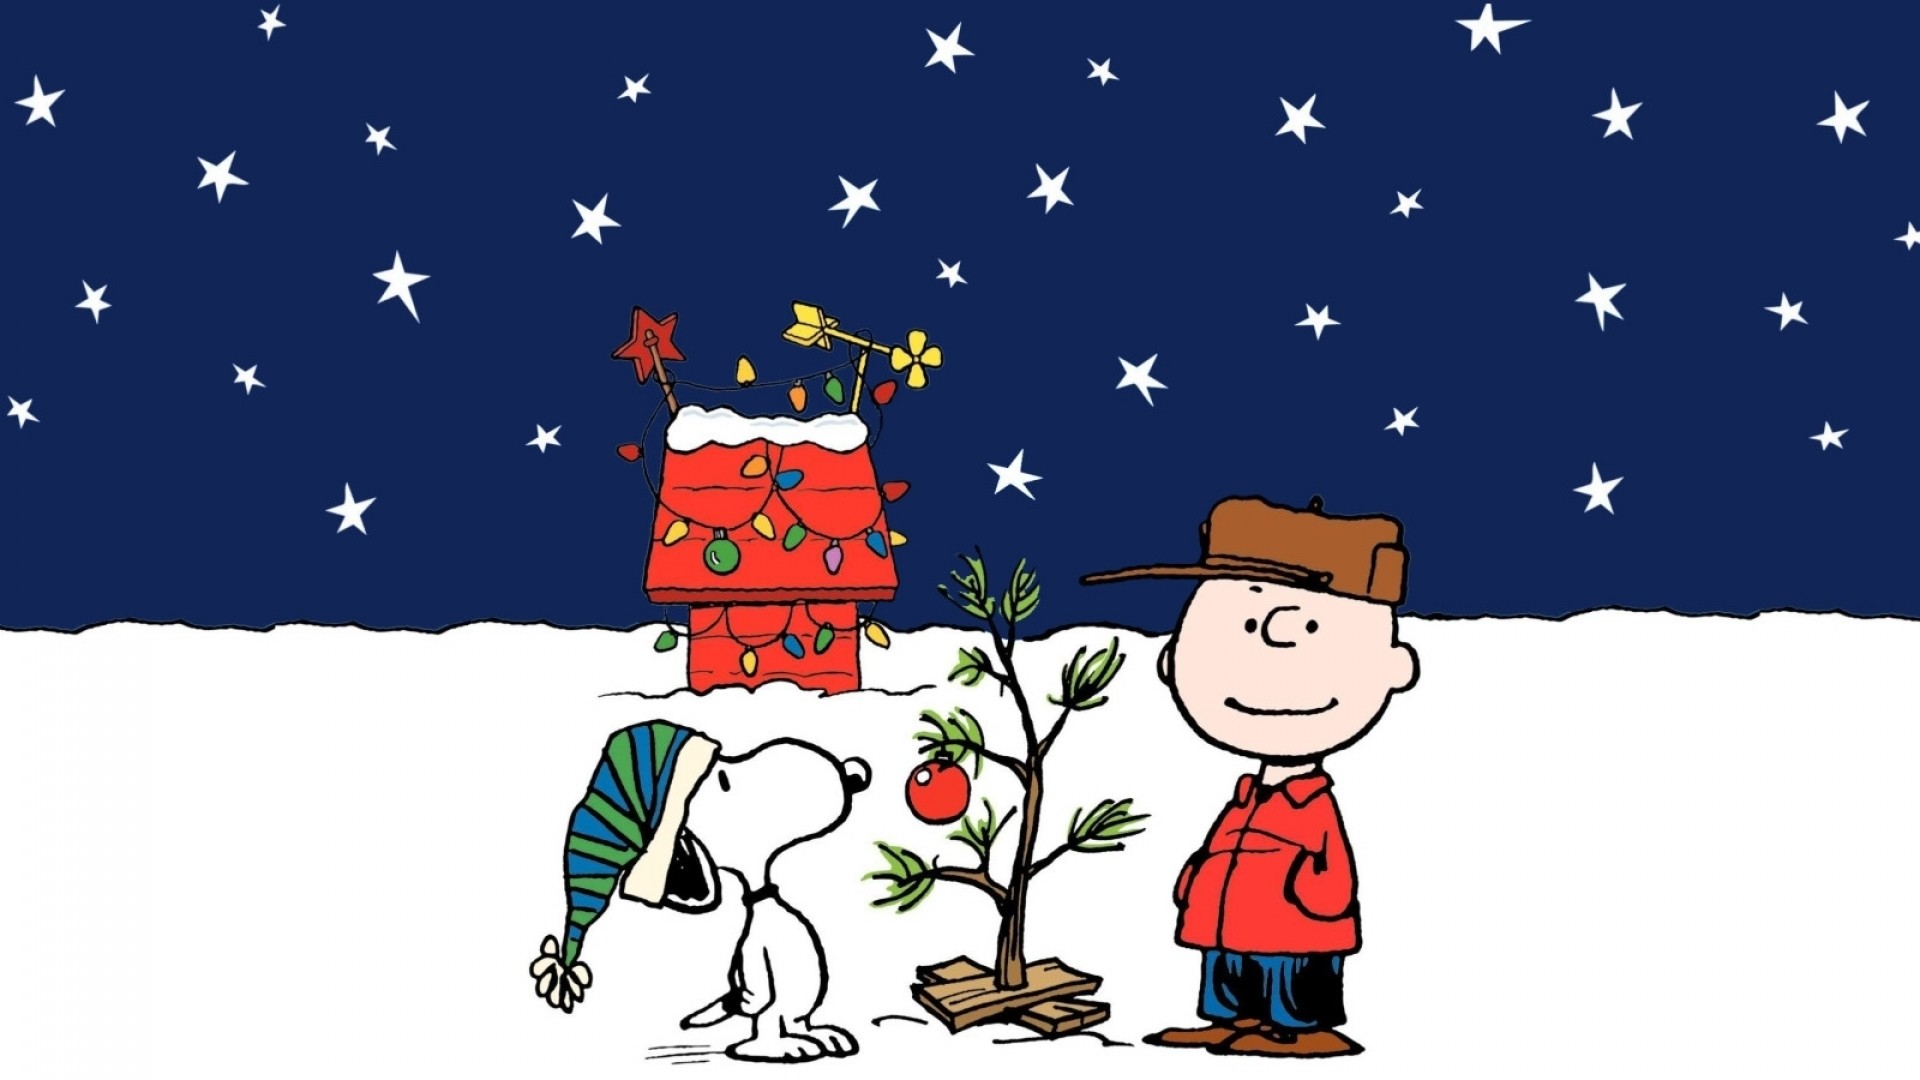 1920x1080 CHARLIE BROWN peanuts comics snoopy christmas gg wallpaper background  